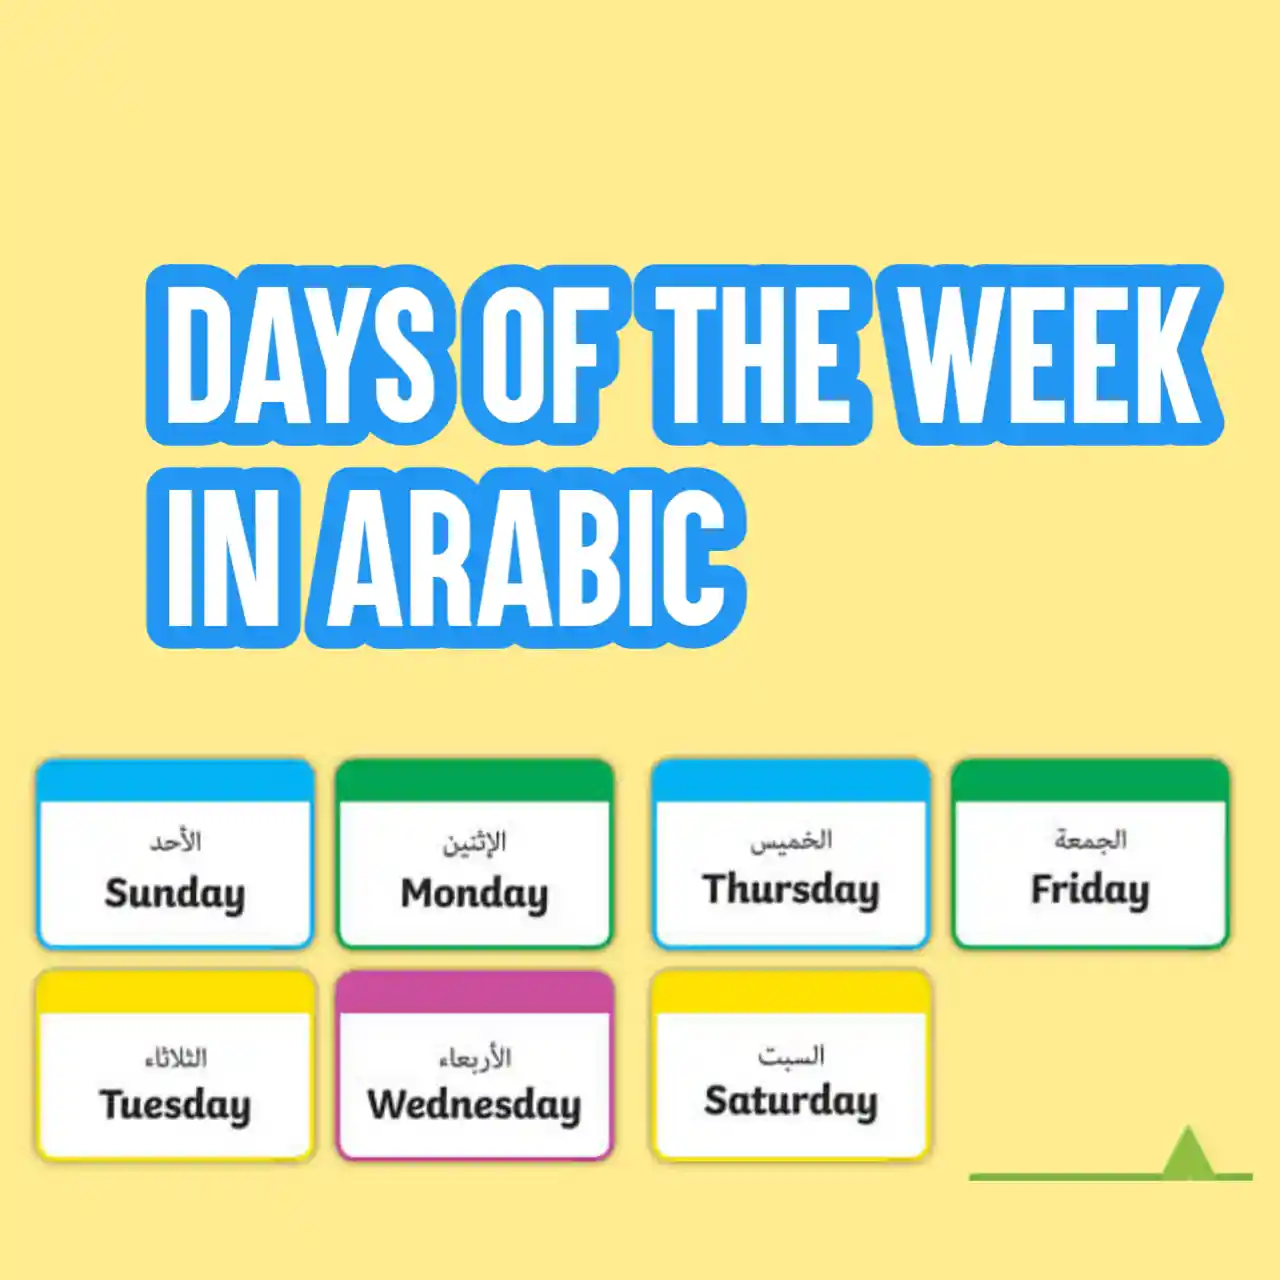 Days Of The Week in Arabic